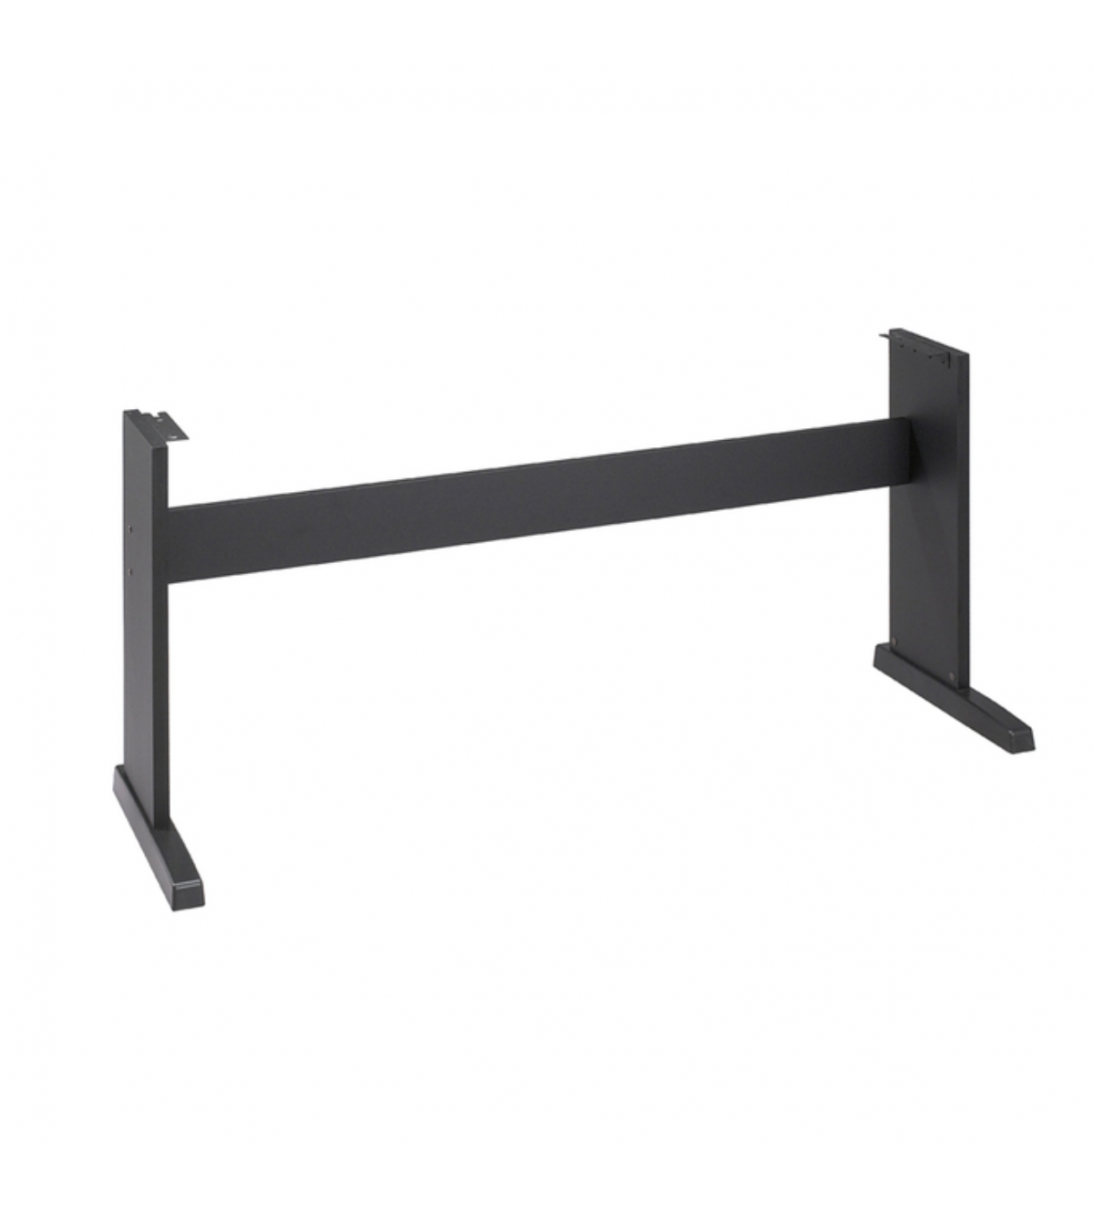 Stage Stand Black